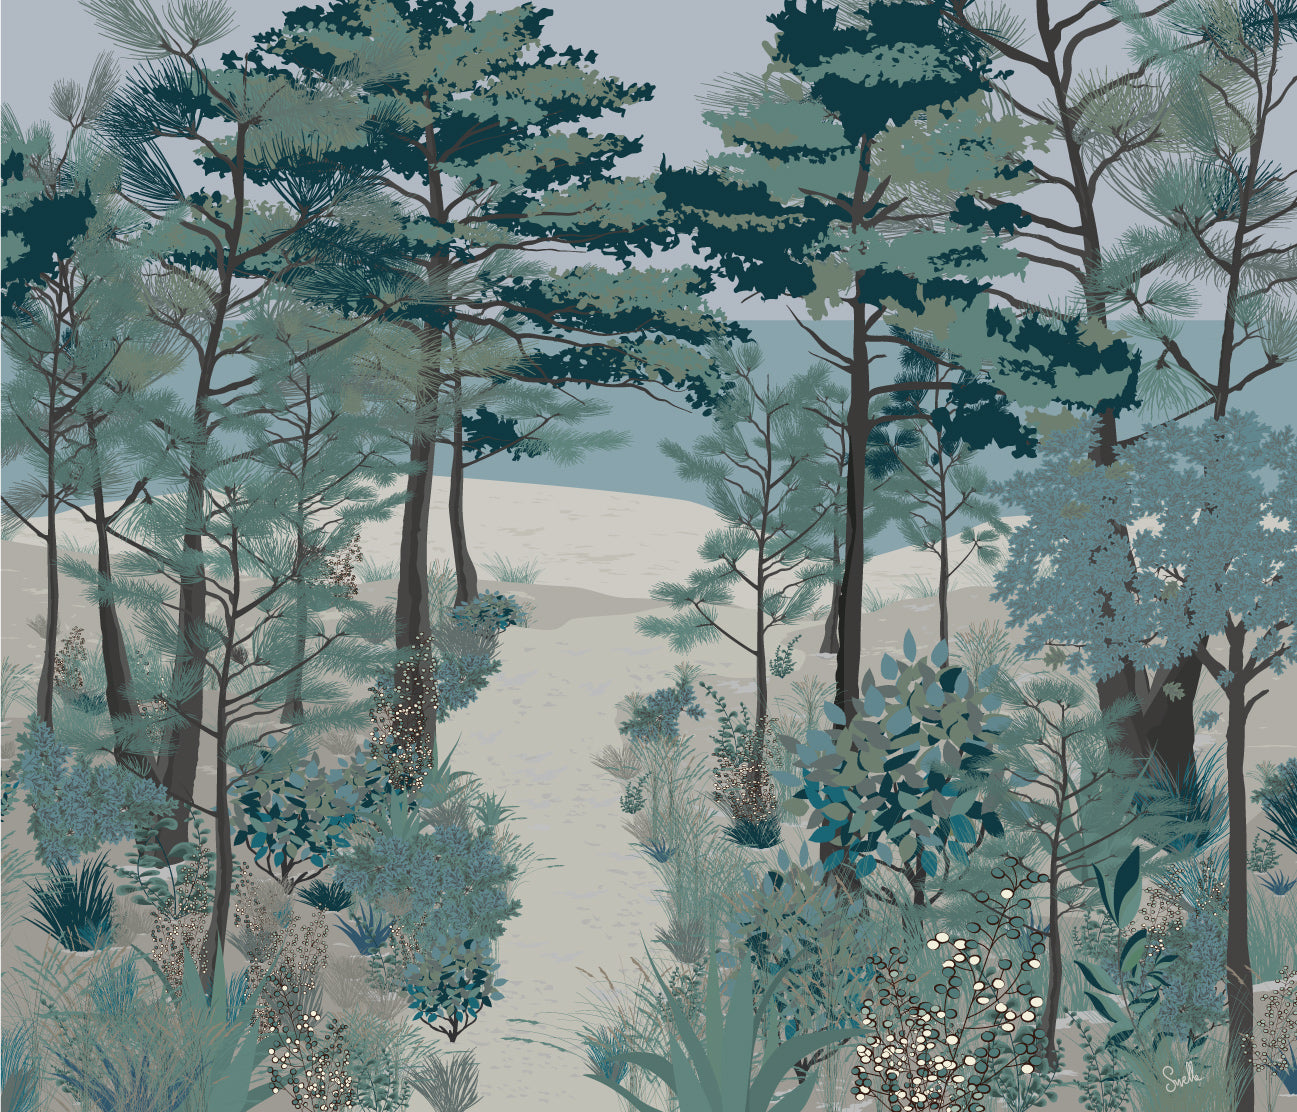 Panoramic wallpaper "The pine forest"